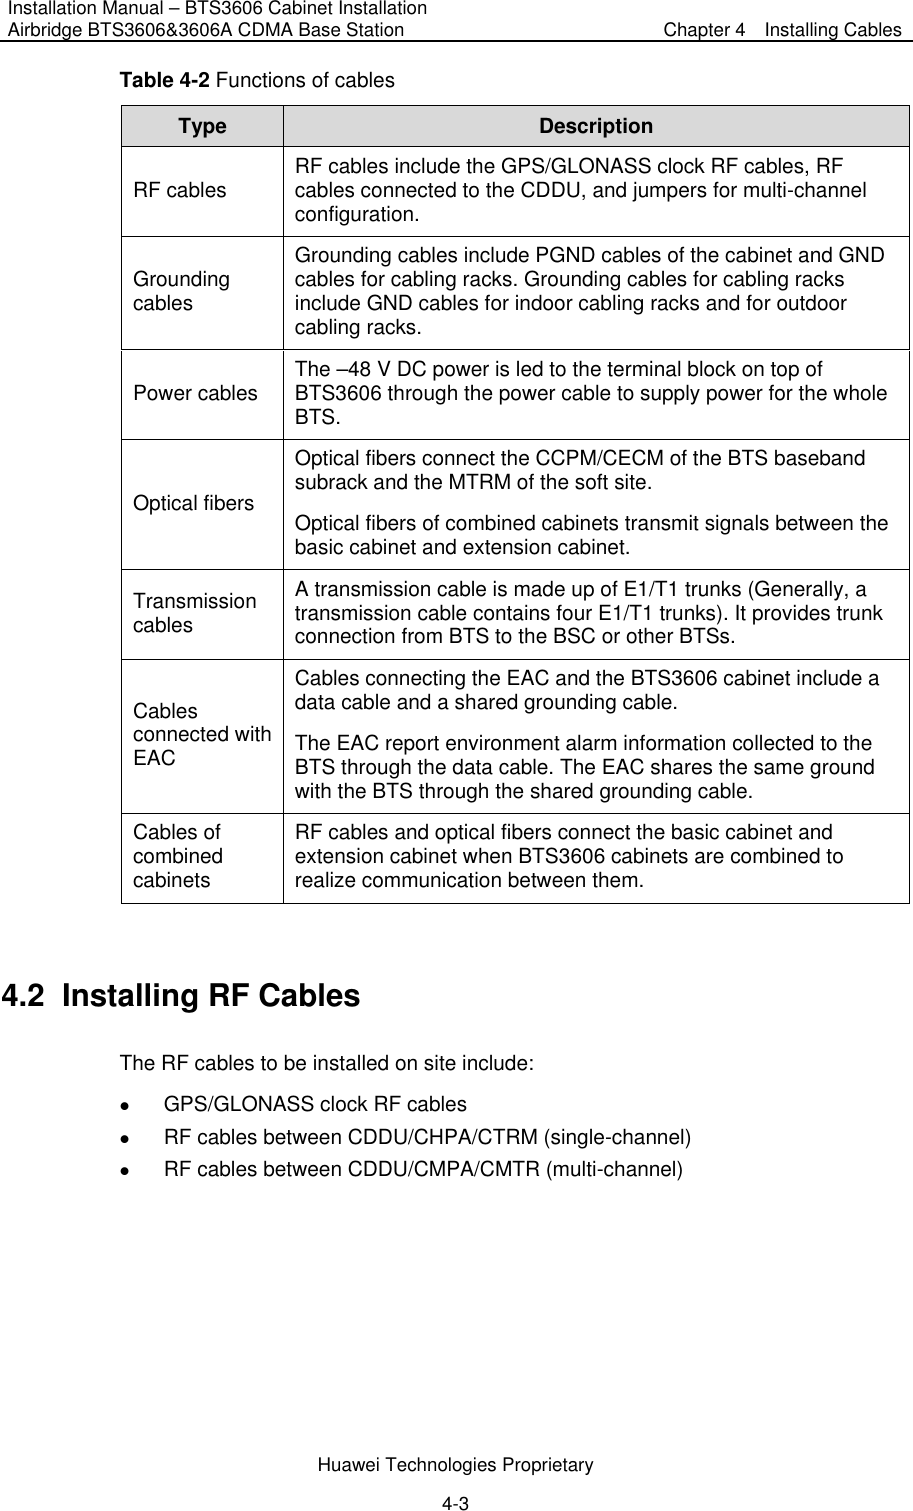 Installation Manual – BTS3606 Cabinet Installation Airbridge BTS3606&amp;3606A CDMA Base Station  Chapter 4    Installing Cables  Huawei Technologies Proprietary 4-3 Table 4-2 Functions of cables Type  Description RF cables  RF cables include the GPS/GLONASS clock RF cables, RF cables connected to the CDDU, and jumpers for multi-channel configuration. Grounding cables Grounding cables include PGND cables of the cabinet and GND cables for cabling racks. Grounding cables for cabling racks include GND cables for indoor cabling racks and for outdoor cabling racks.   Power cables  The –48 V DC power is led to the terminal block on top of BTS3606 through the power cable to supply power for the whole BTS.  Optical fibers Optical fibers connect the CCPM/CECM of the BTS baseband subrack and the MTRM of the soft site. Optical fibers of combined cabinets transmit signals between the basic cabinet and extension cabinet. Transmission cables A transmission cable is made up of E1/T1 trunks (Generally, a transmission cable contains four E1/T1 trunks). It provides trunk connection from BTS to the BSC or other BTSs. Cables connected with EAC Cables connecting the EAC and the BTS3606 cabinet include a data cable and a shared grounding cable.   The EAC report environment alarm information collected to the BTS through the data cable. The EAC shares the same ground with the BTS through the shared grounding cable. Cables of combined cabinets RF cables and optical fibers connect the basic cabinet and extension cabinet when BTS3606 cabinets are combined to realize communication between them.  4.2  Installing RF Cables The RF cables to be installed on site include: z GPS/GLONASS clock RF cables z RF cables between CDDU/CHPA/CTRM (single-channel) z RF cables between CDDU/CMPA/CMTR (multi-channel) 